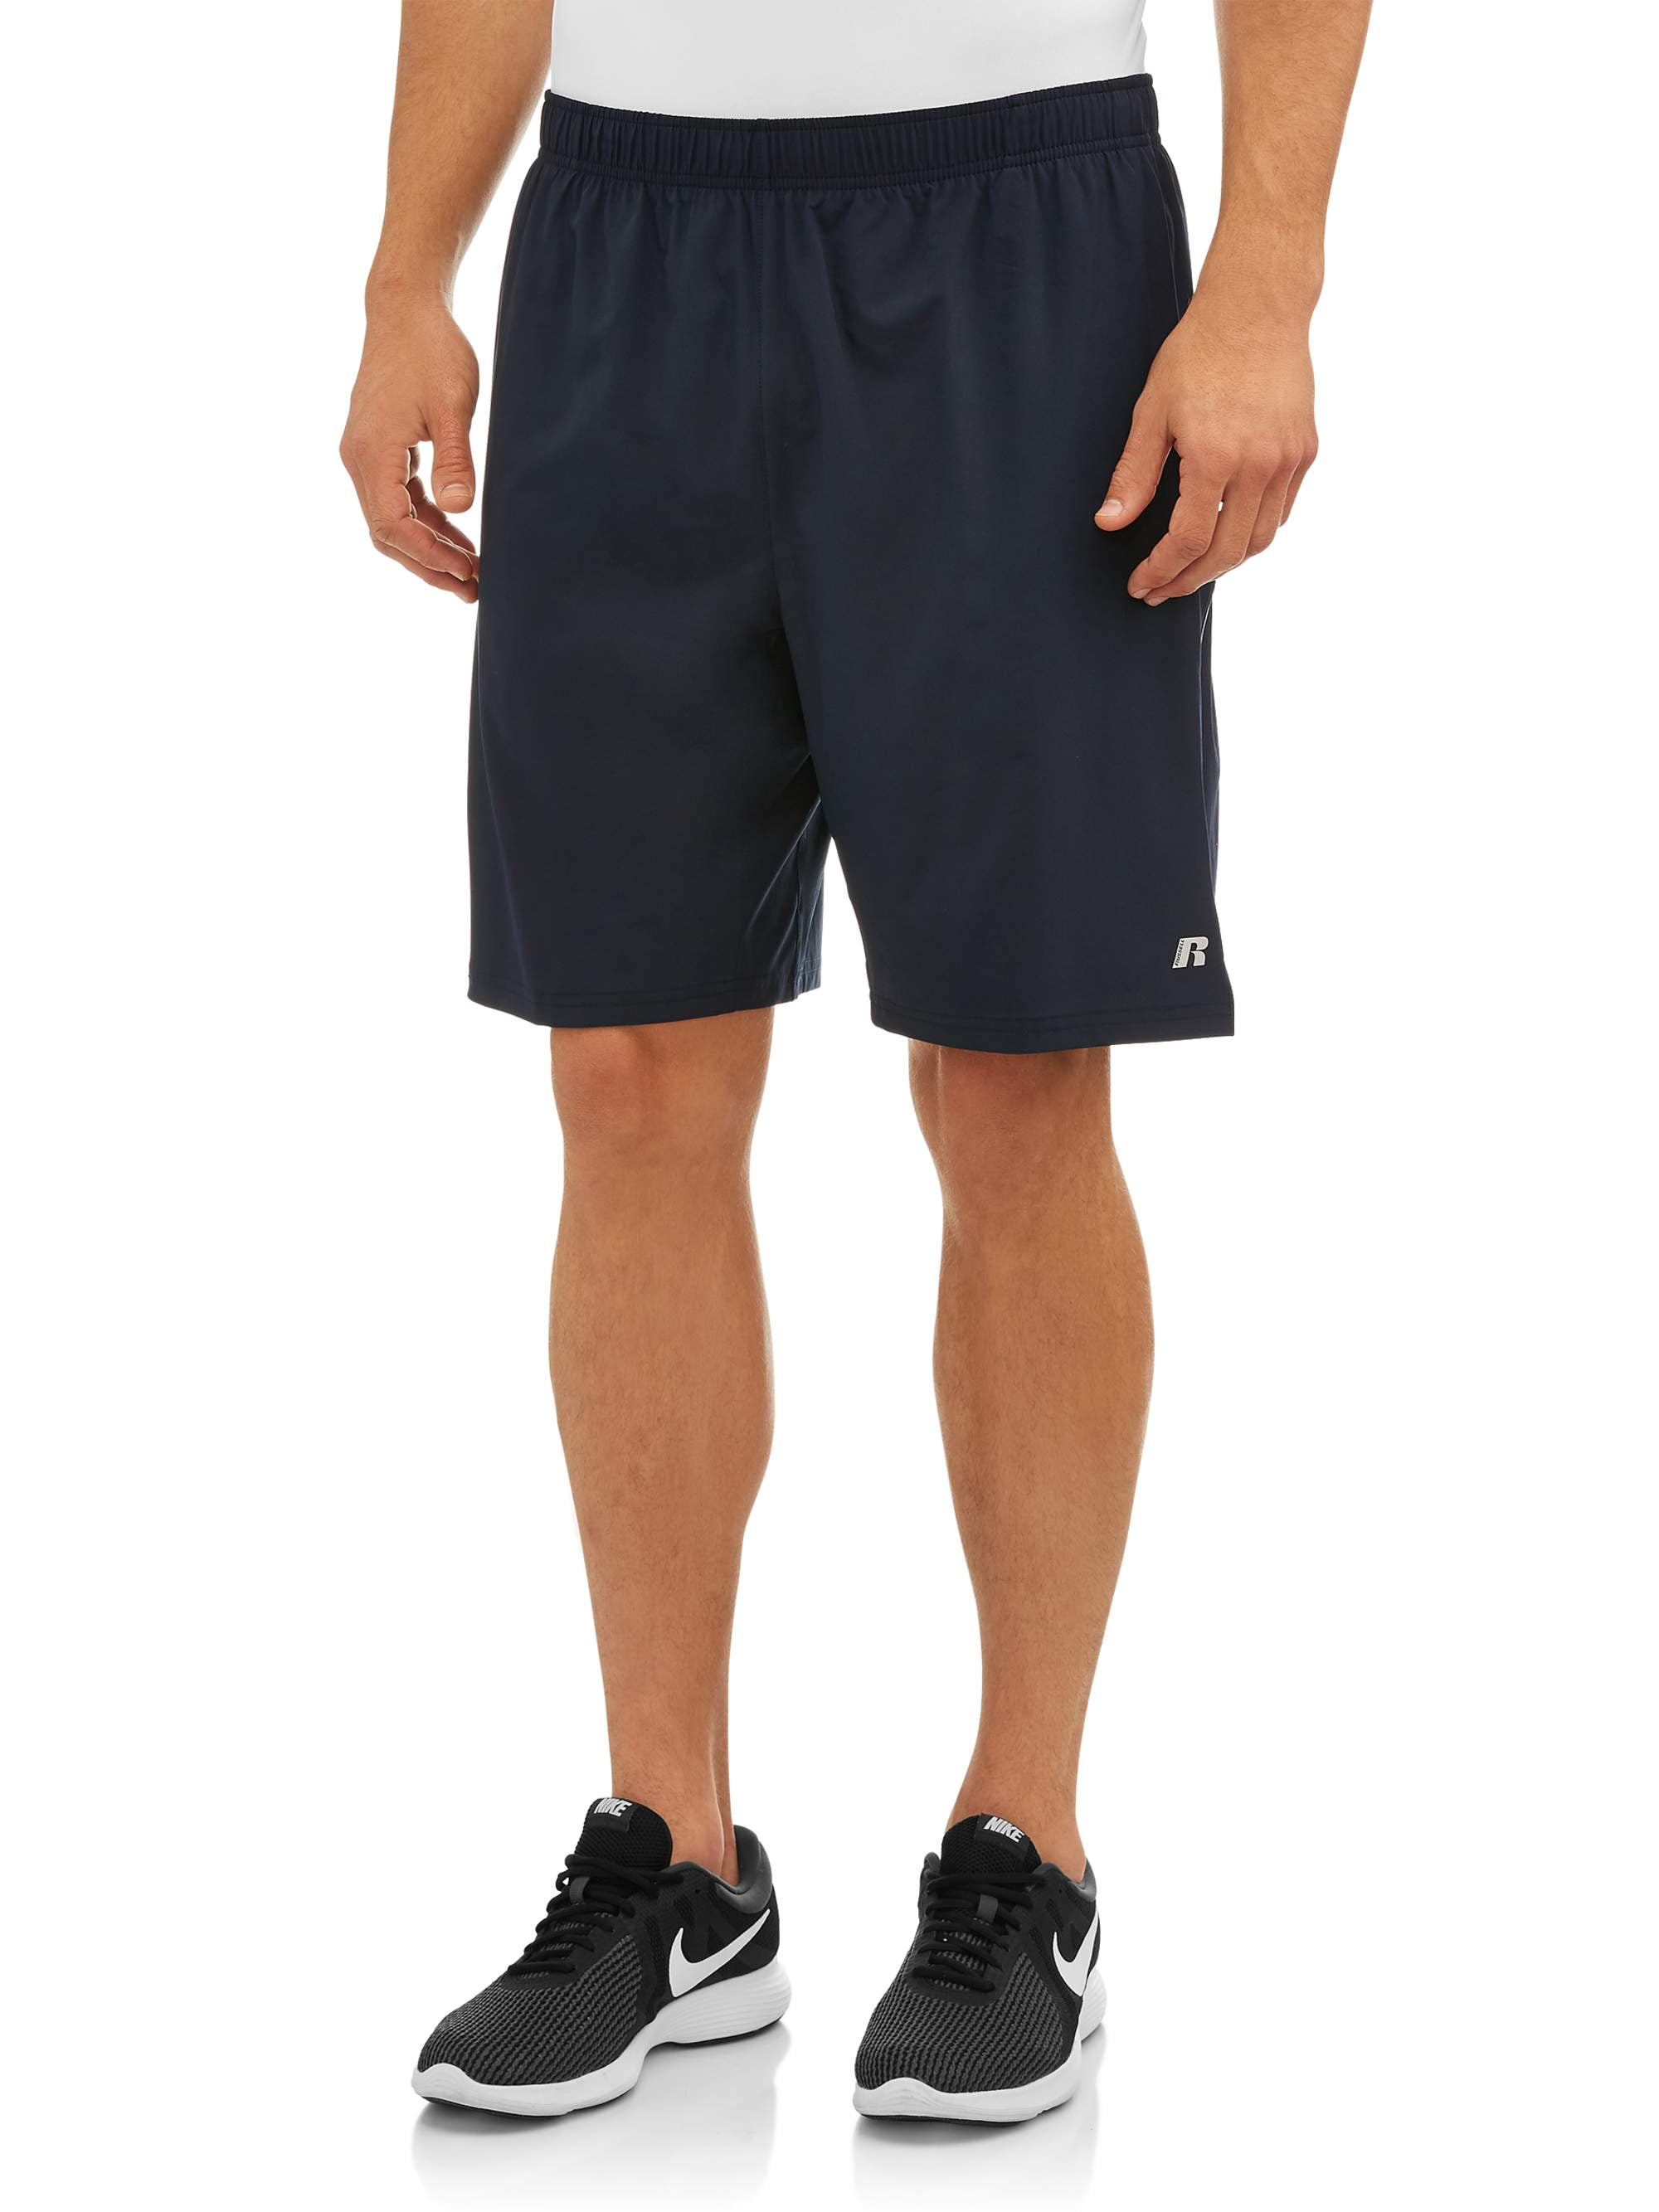 Big Men's Performance 9 2-in-1 Stretch Woven Shorts with Boxer Liner ...